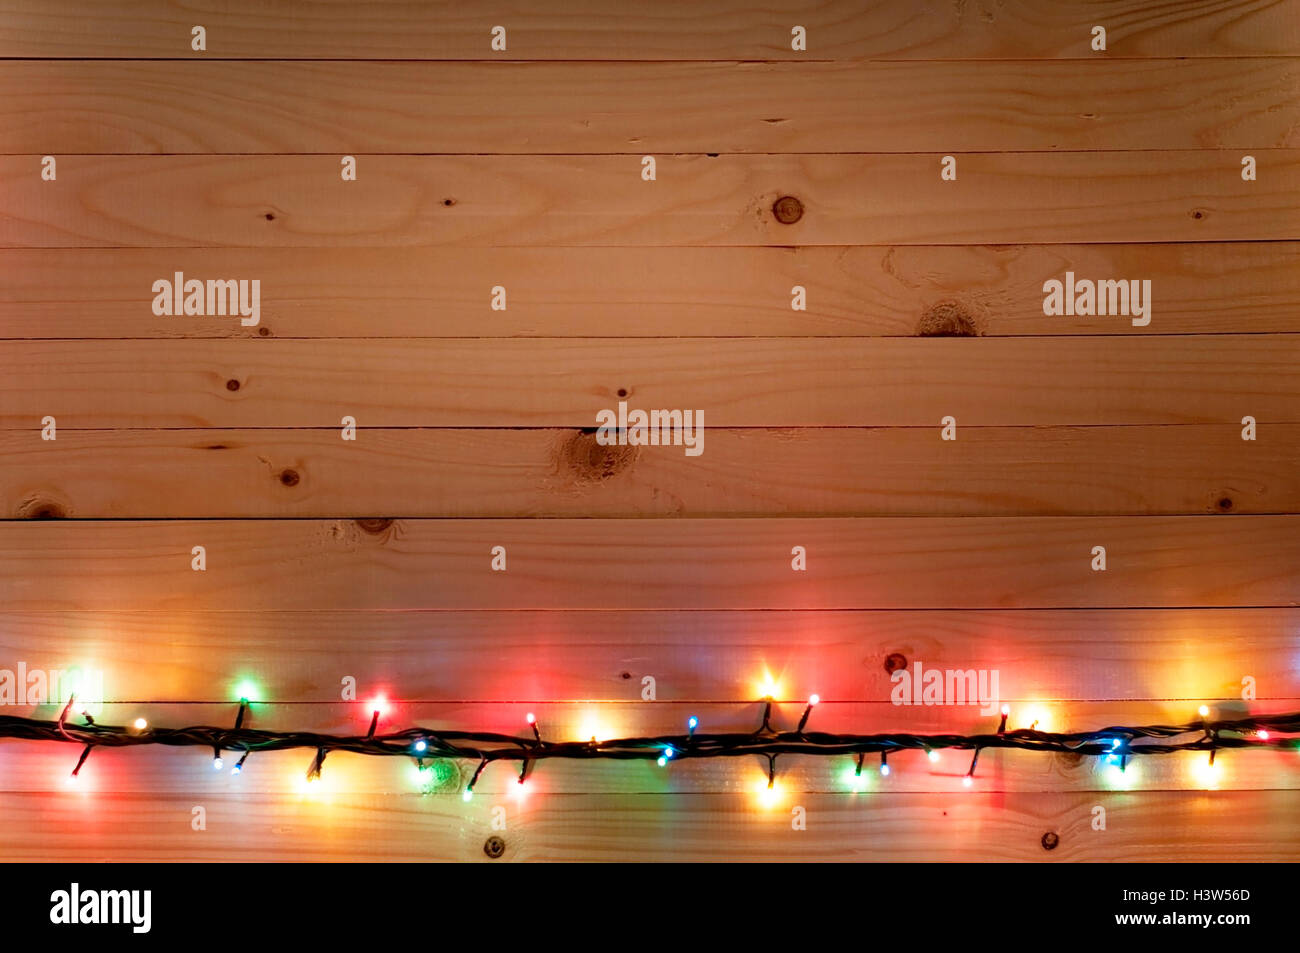 Christmas light boarder on wooden background. Stock Photo